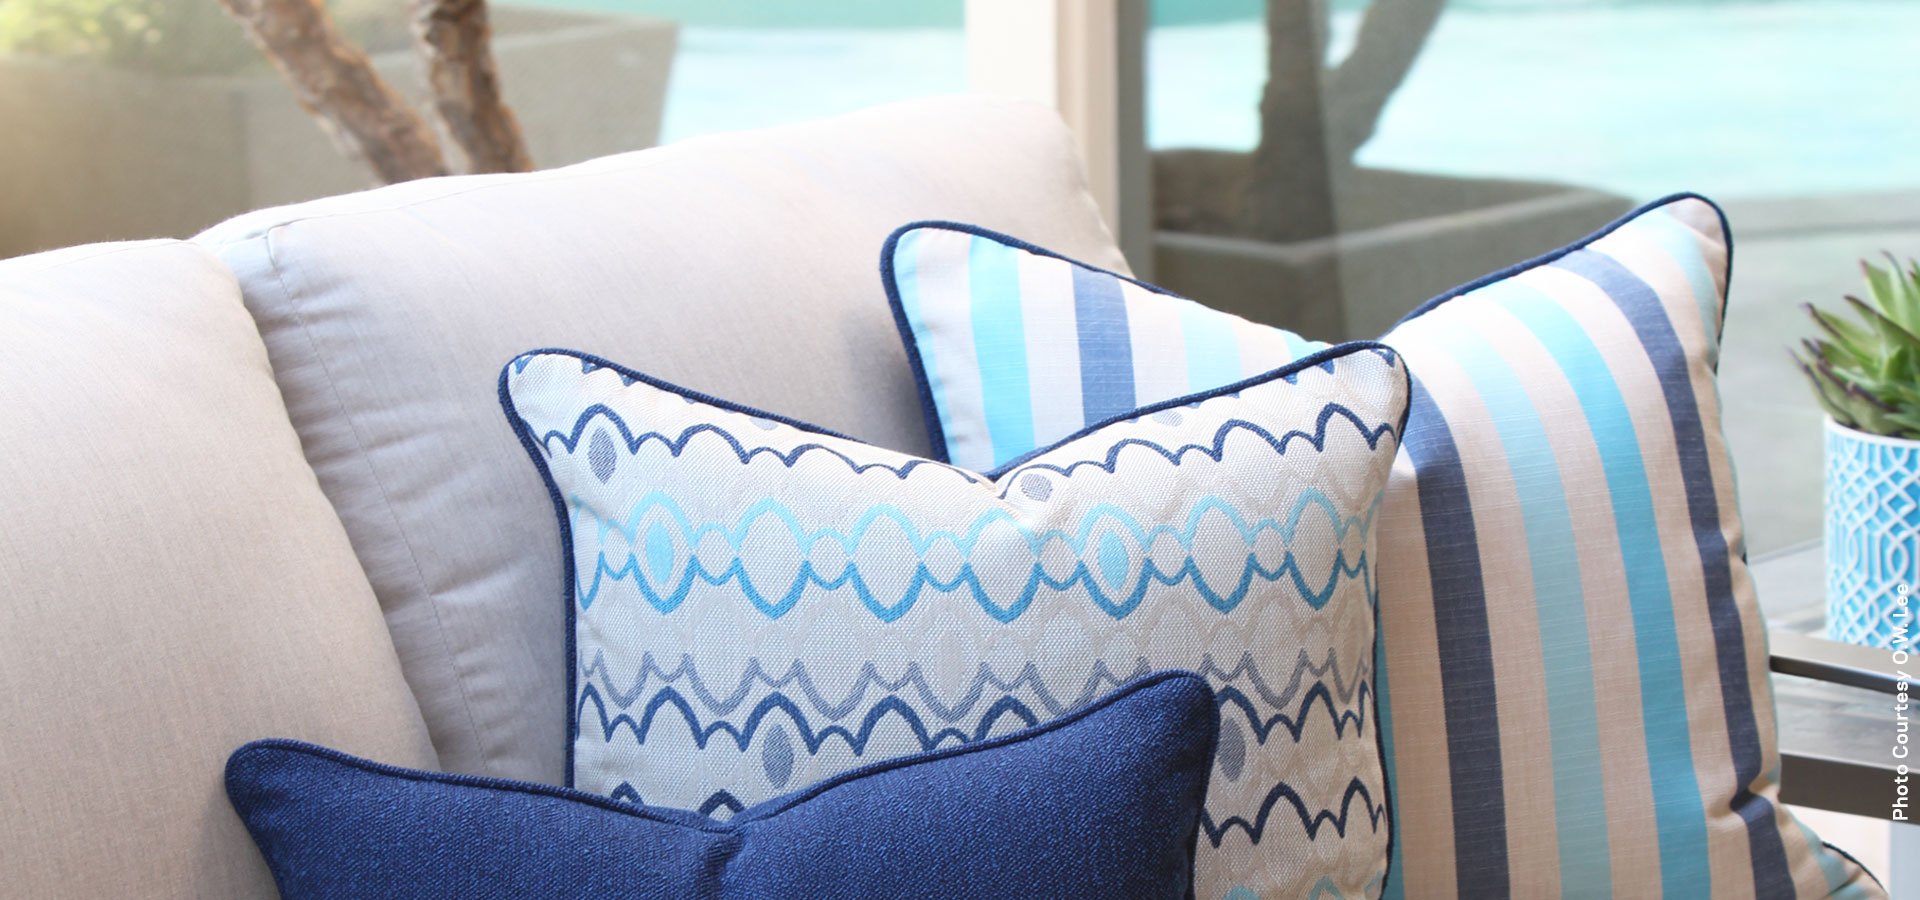 Outdura’s 100% solution-dyed fabrics are perfect for cushions and pillows for outdoor use due to their high water repellent nature.